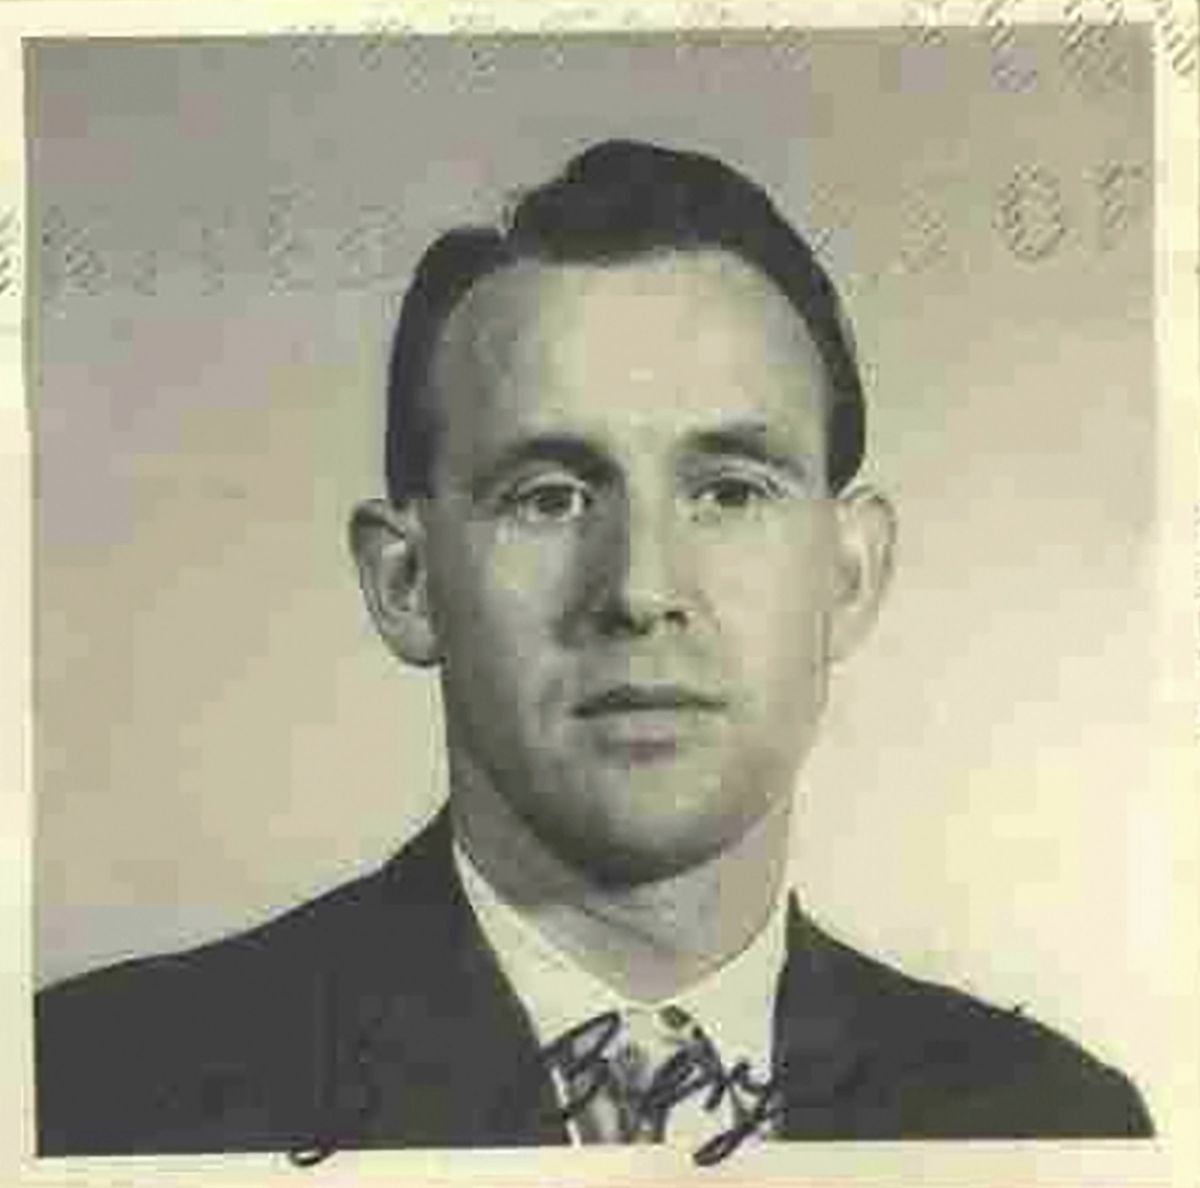 This 1959 photo released by the U.S. Department of Justice shows Friedrich Karl Berger. Authorities say the 95-year-old former Nazi concentration camp guard deported from Tennessee has agreed to be questioned by German prosecutors as they re-examine whether there is enough evidence against him to bring charges. Berger arrived Saturday, Feb. 20, 2021, in Frankfurt on a special flight from the U.S. after being ordered deported to his native Germany by a court in Memphis last year.  (HONS)